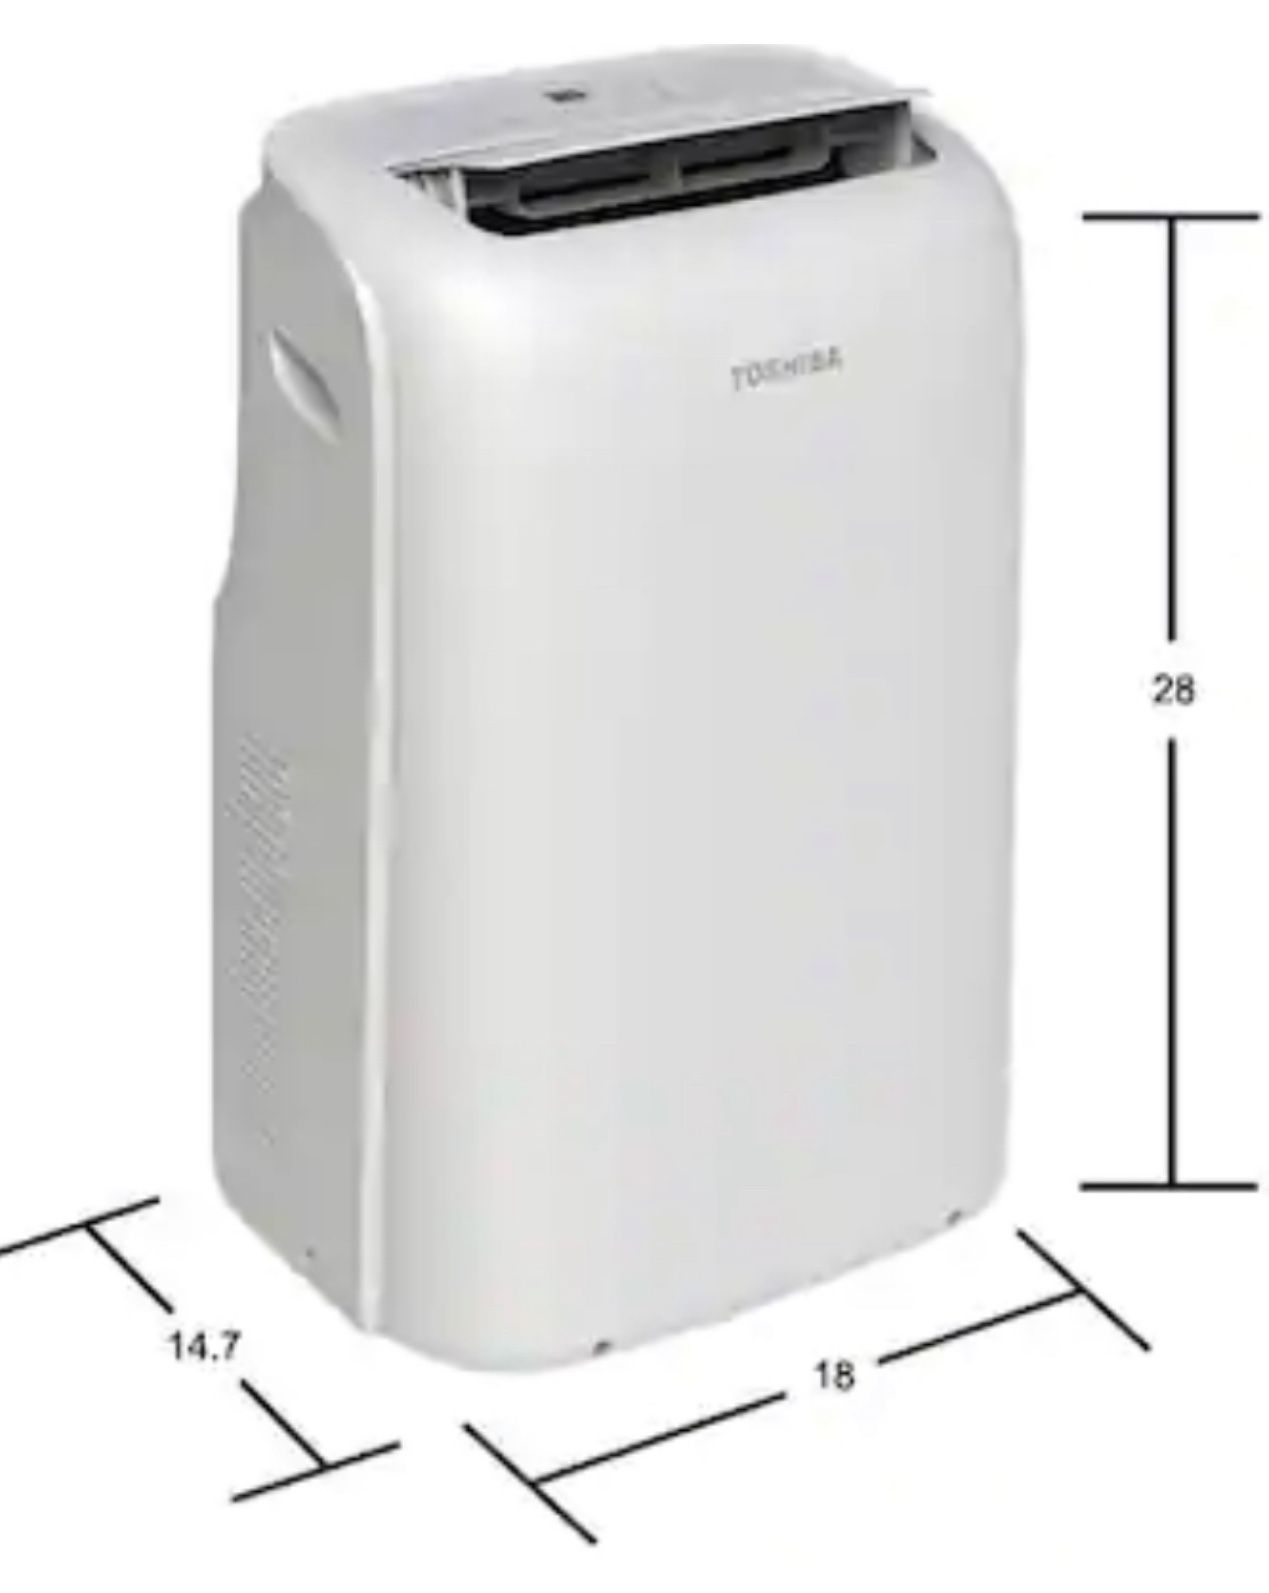 Used Toshiba 8,000 BTU Portable Air Conditioner Cools 350 Sq. Ft. with Dehumidifier and Remote Control in White